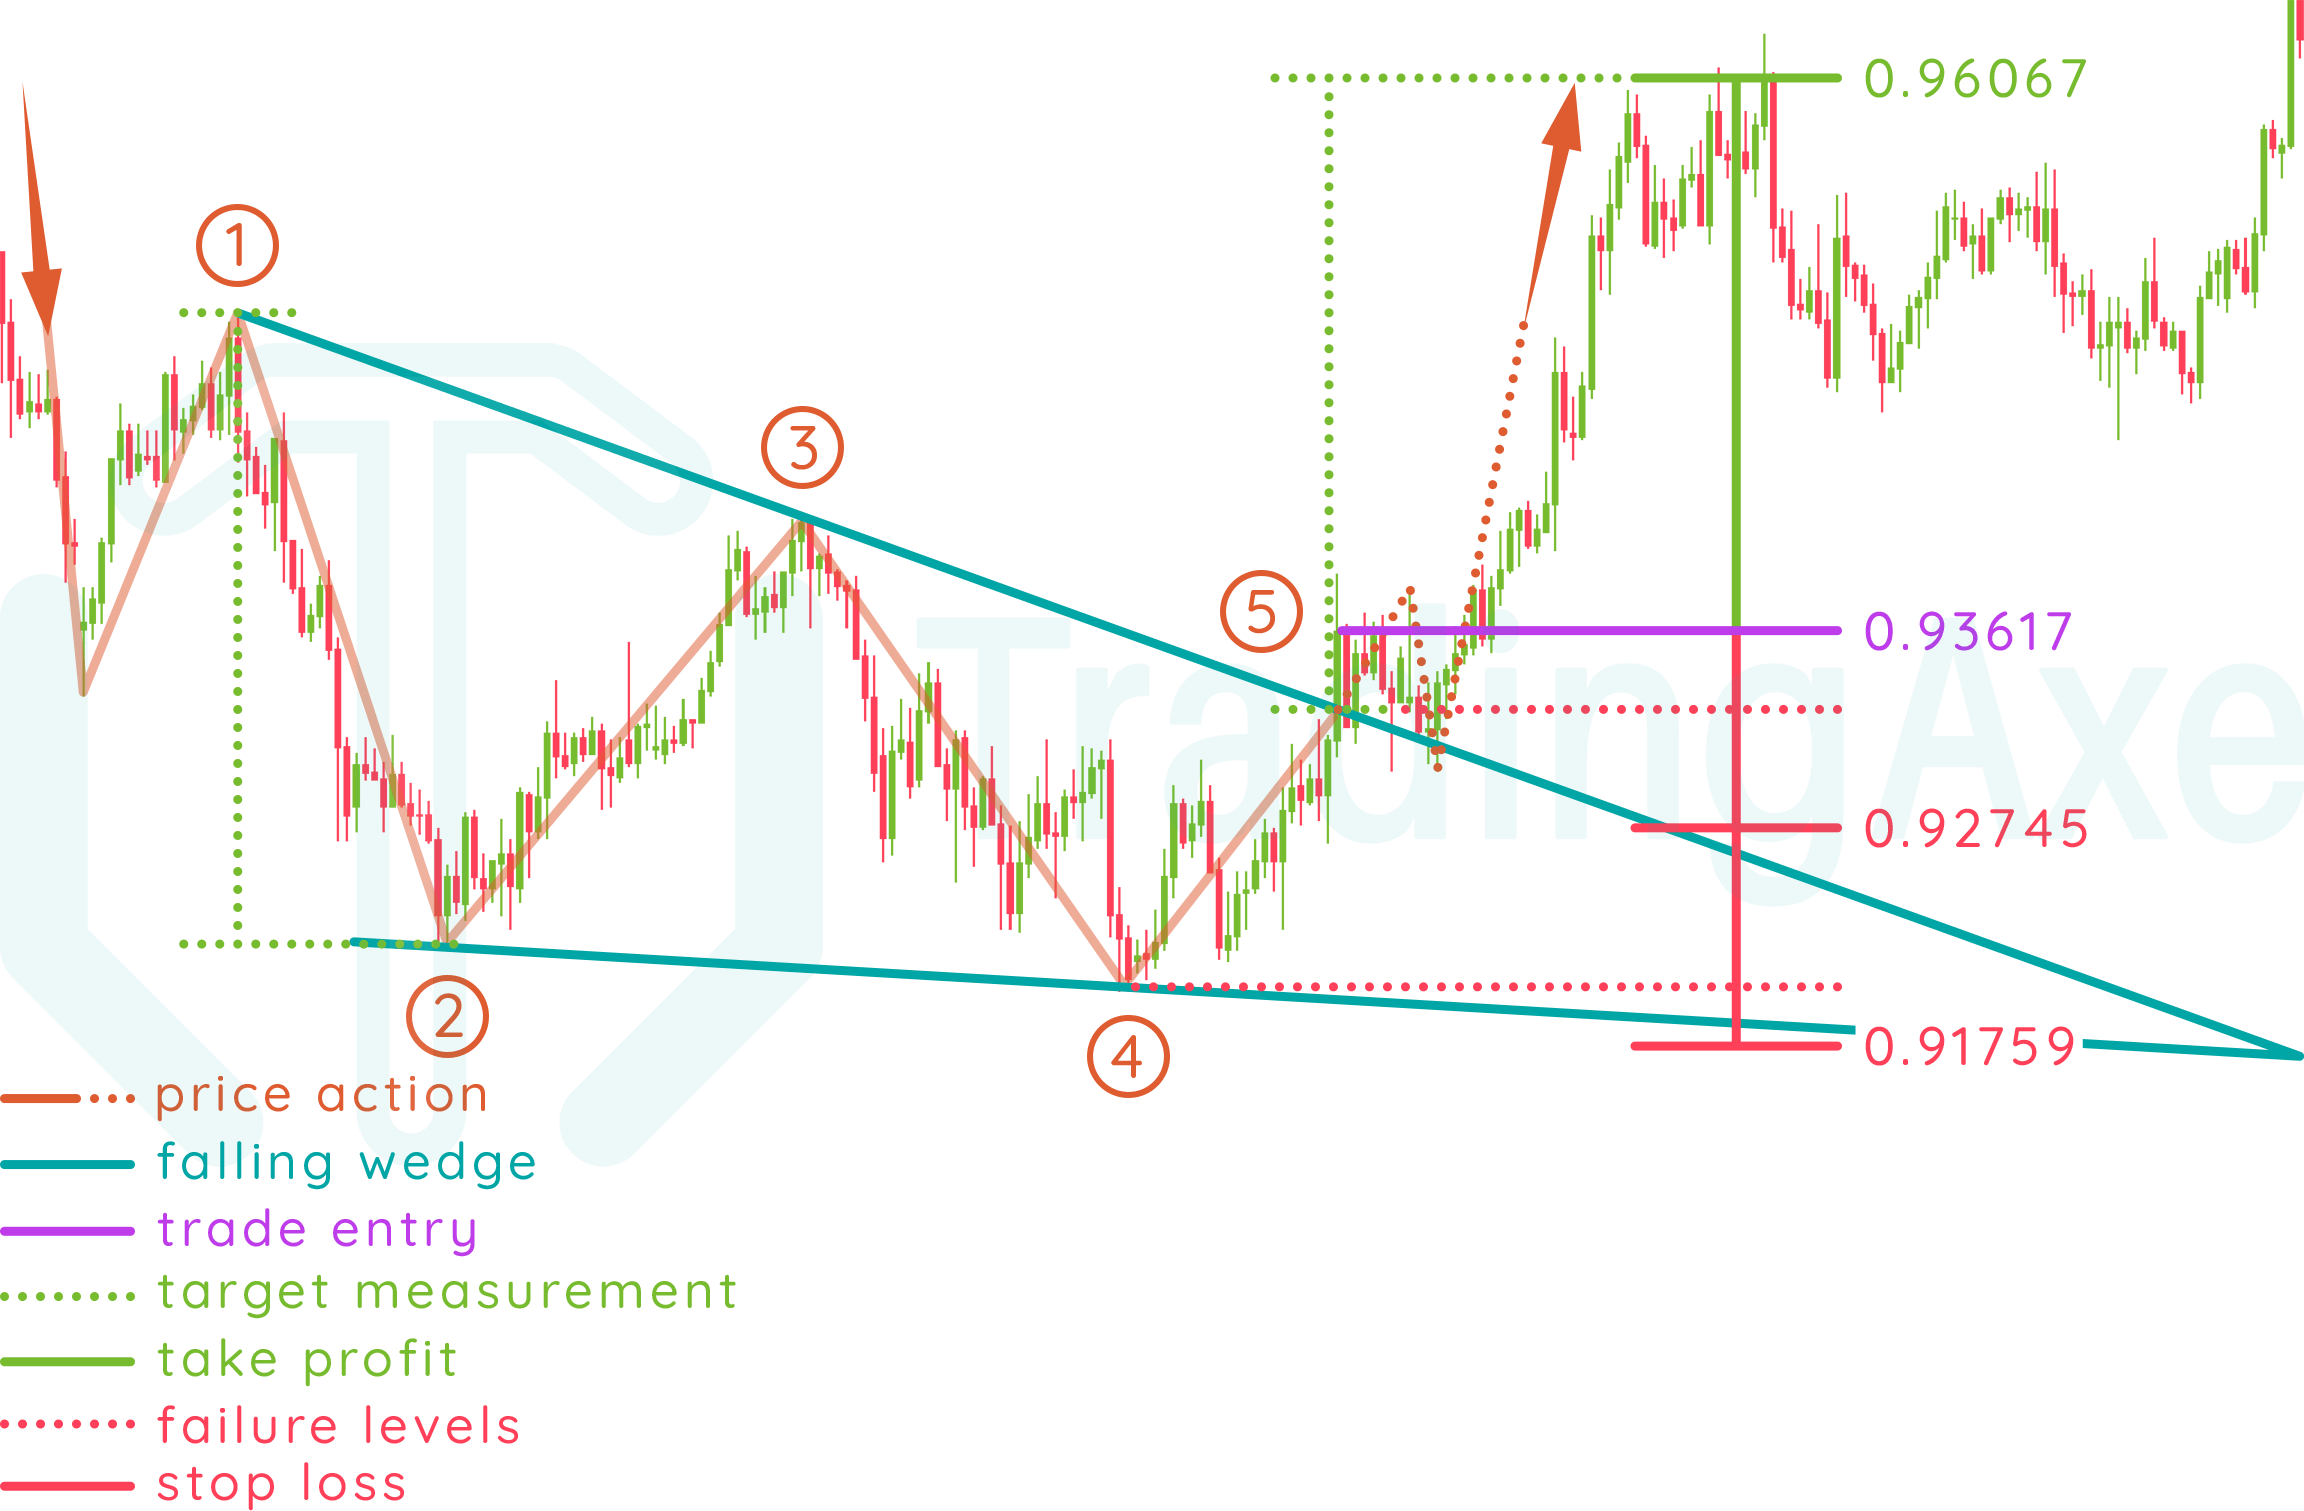 Falling wedge real trading example